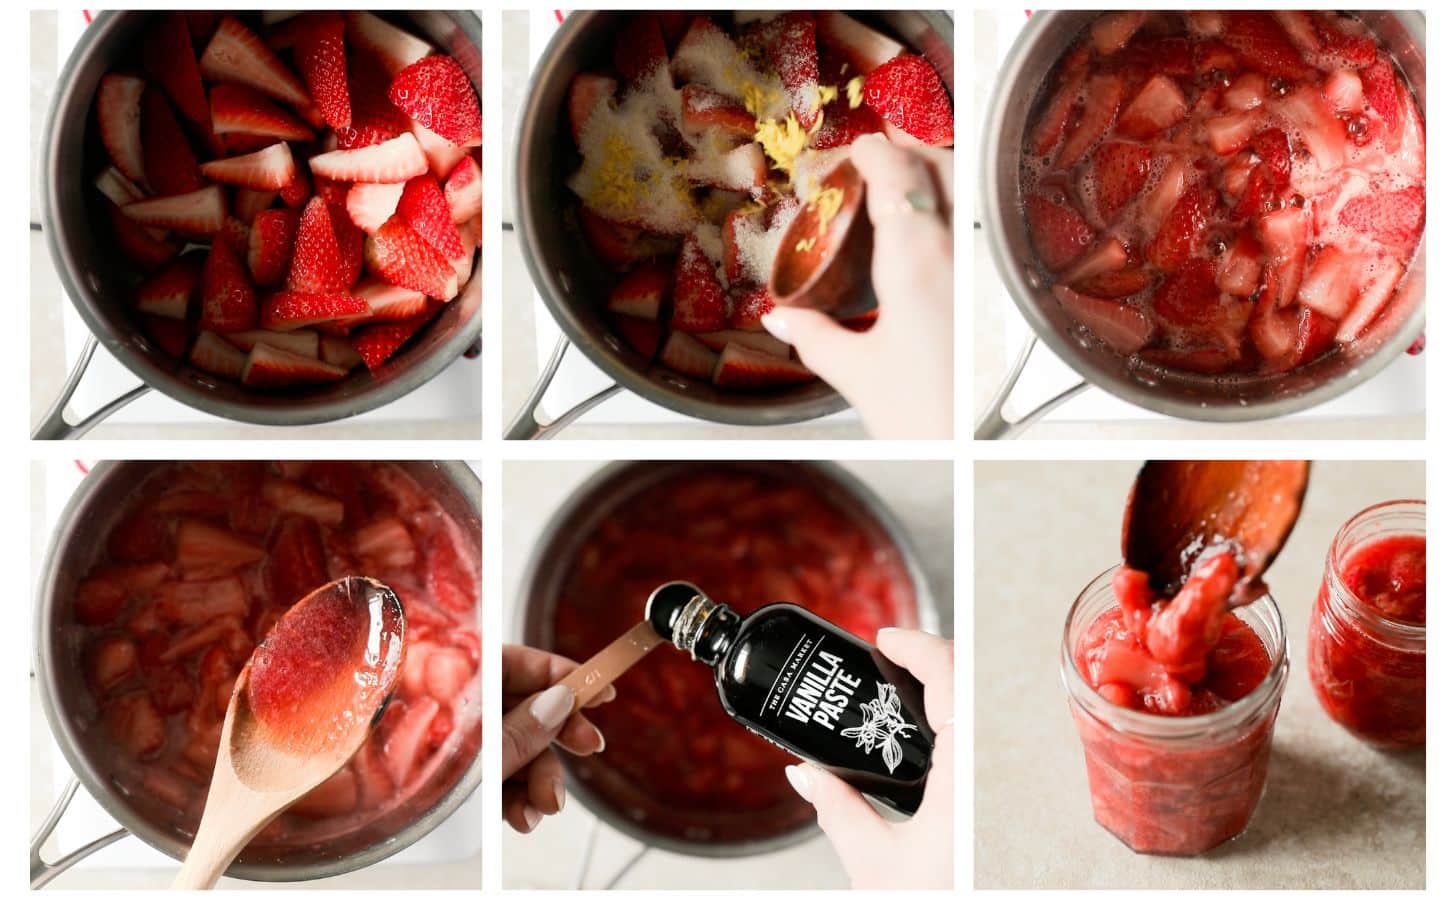 Six steps to making compote; photo 1 is strawberries in a pot. In photo 2, a hand pours sugar and lemon zest into the berries. In photo 3, the berries are boiling. Photo 4 is a wood spoon with thick, red liquid. Photo 5 has hands pouring vanilla bean paste into the berries. In photo 6, a spoon is pouring the berries into jars on a tan counter.